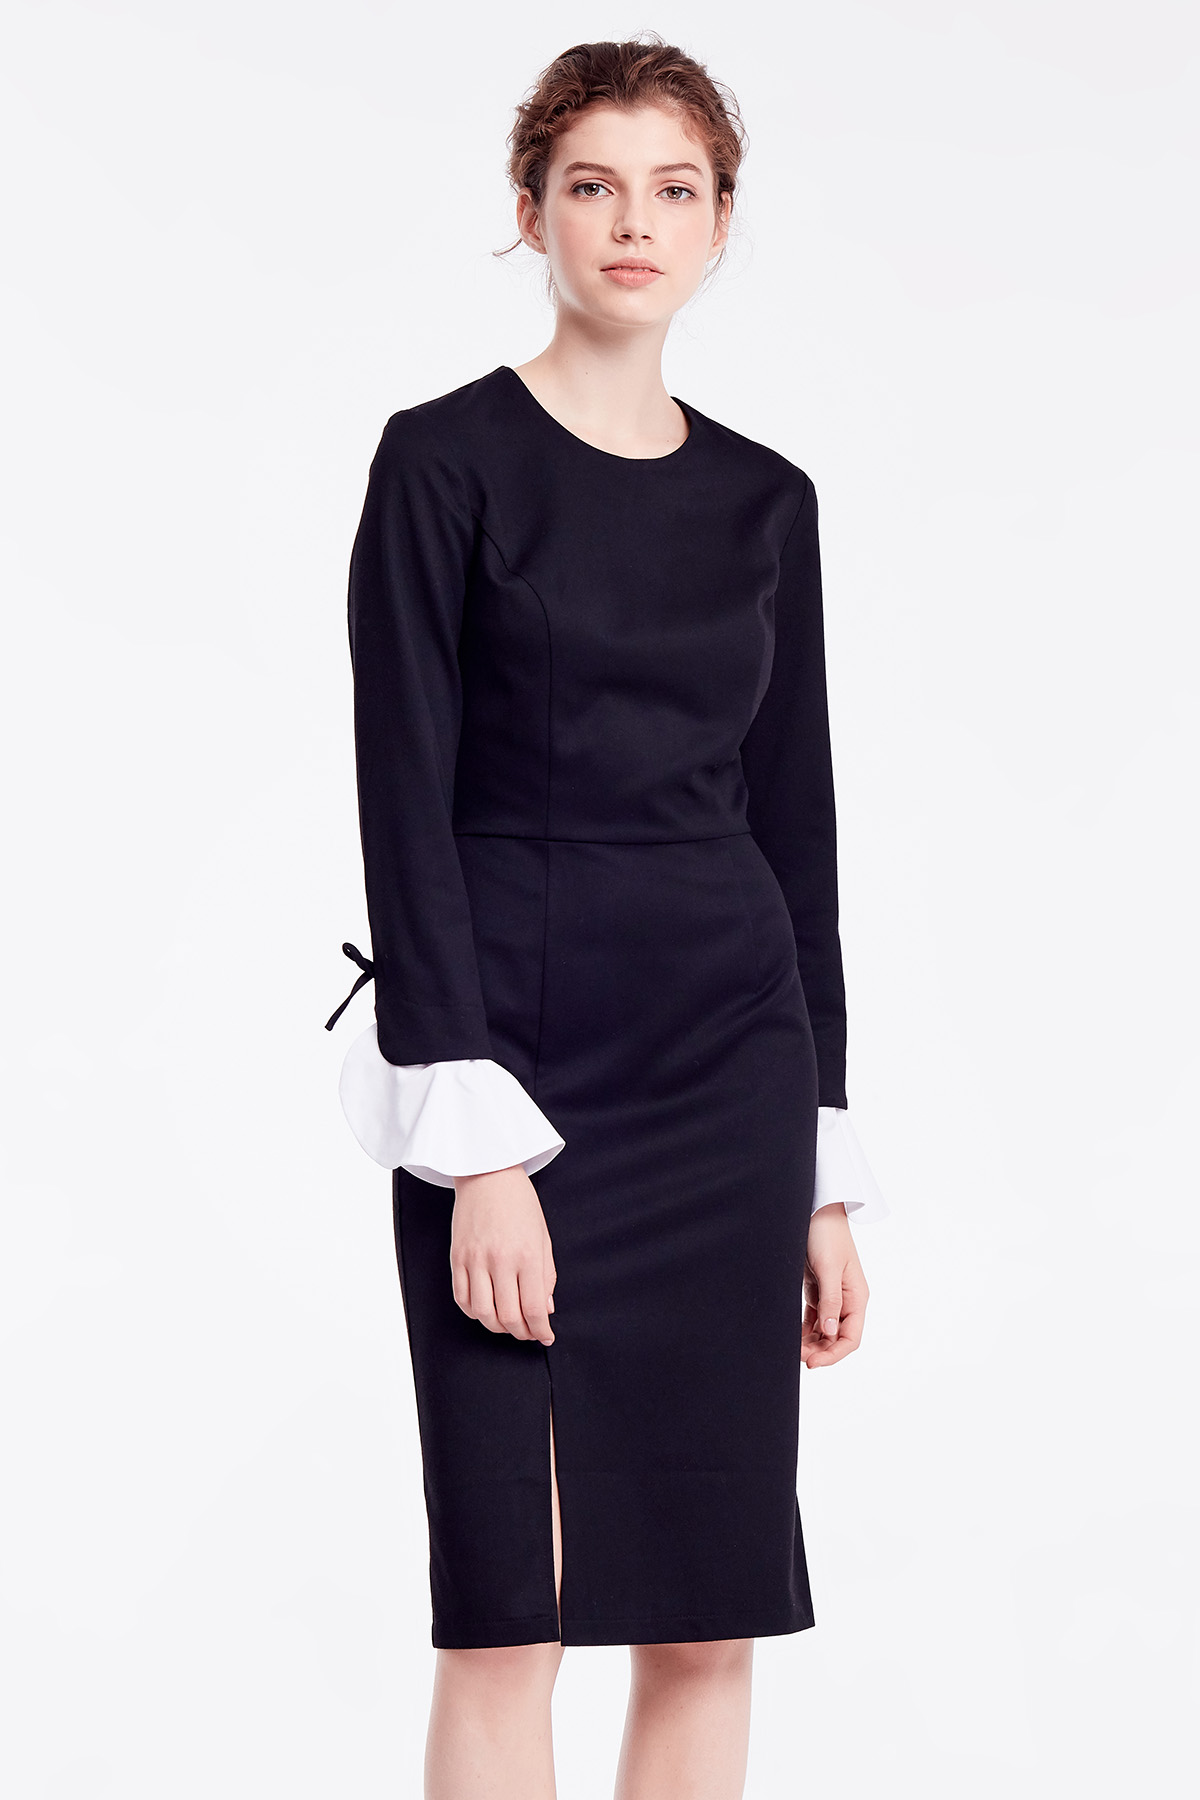 Black column dress with white cuffs on sleeves, photo 7